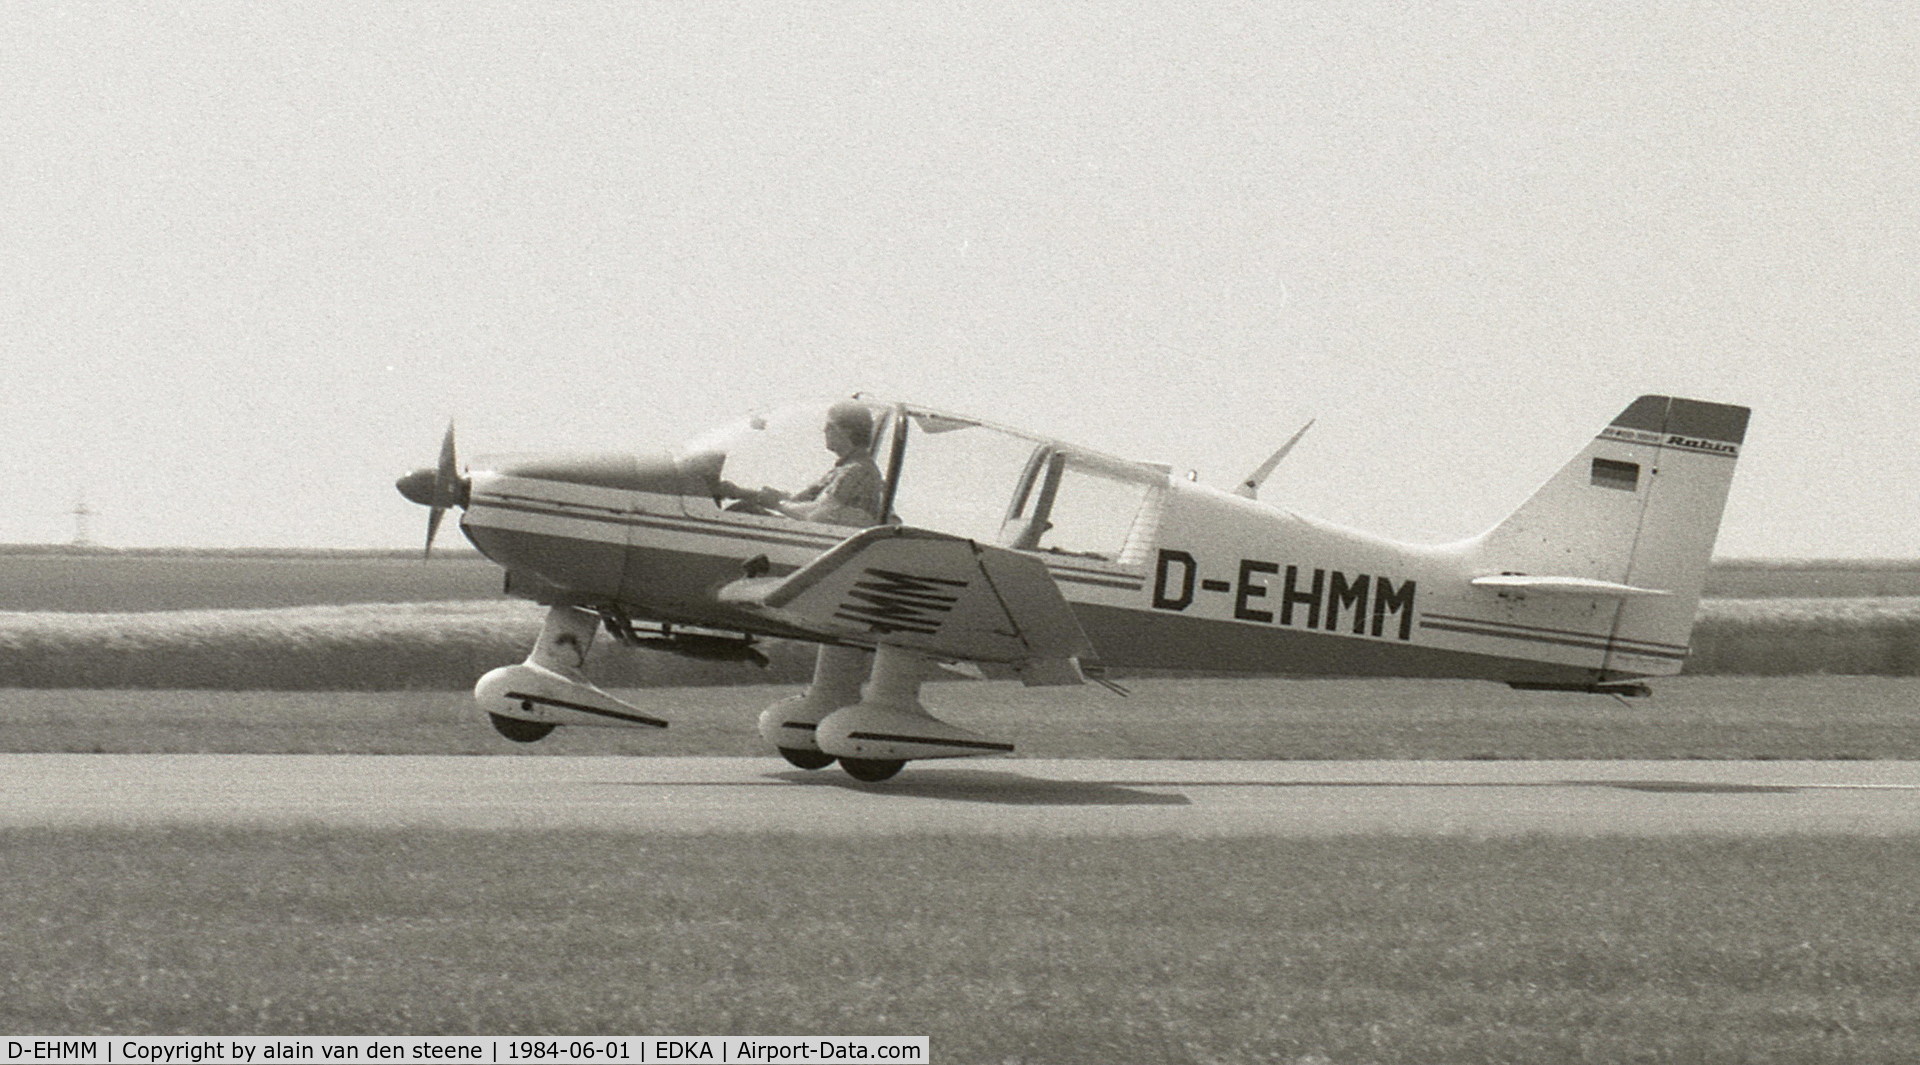 D-EHMM, Great Lakes 2T-1 Sport Trainer C/N 0762, Robin DR400 ; ICAO was EDCM at that time ; ca 1984